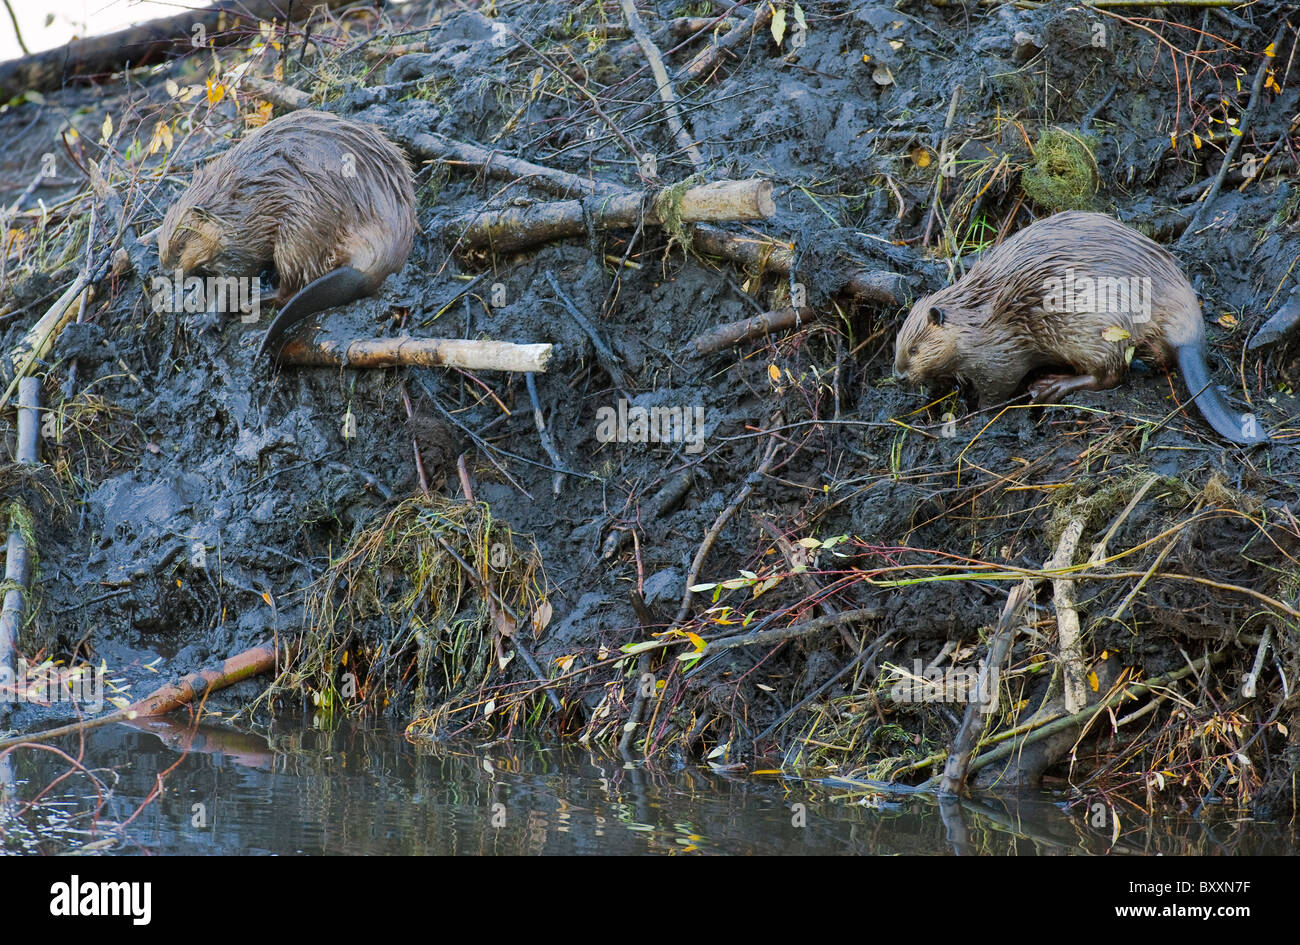 Two beavers working on adding wet mud to the side of their lodge Stock Photo